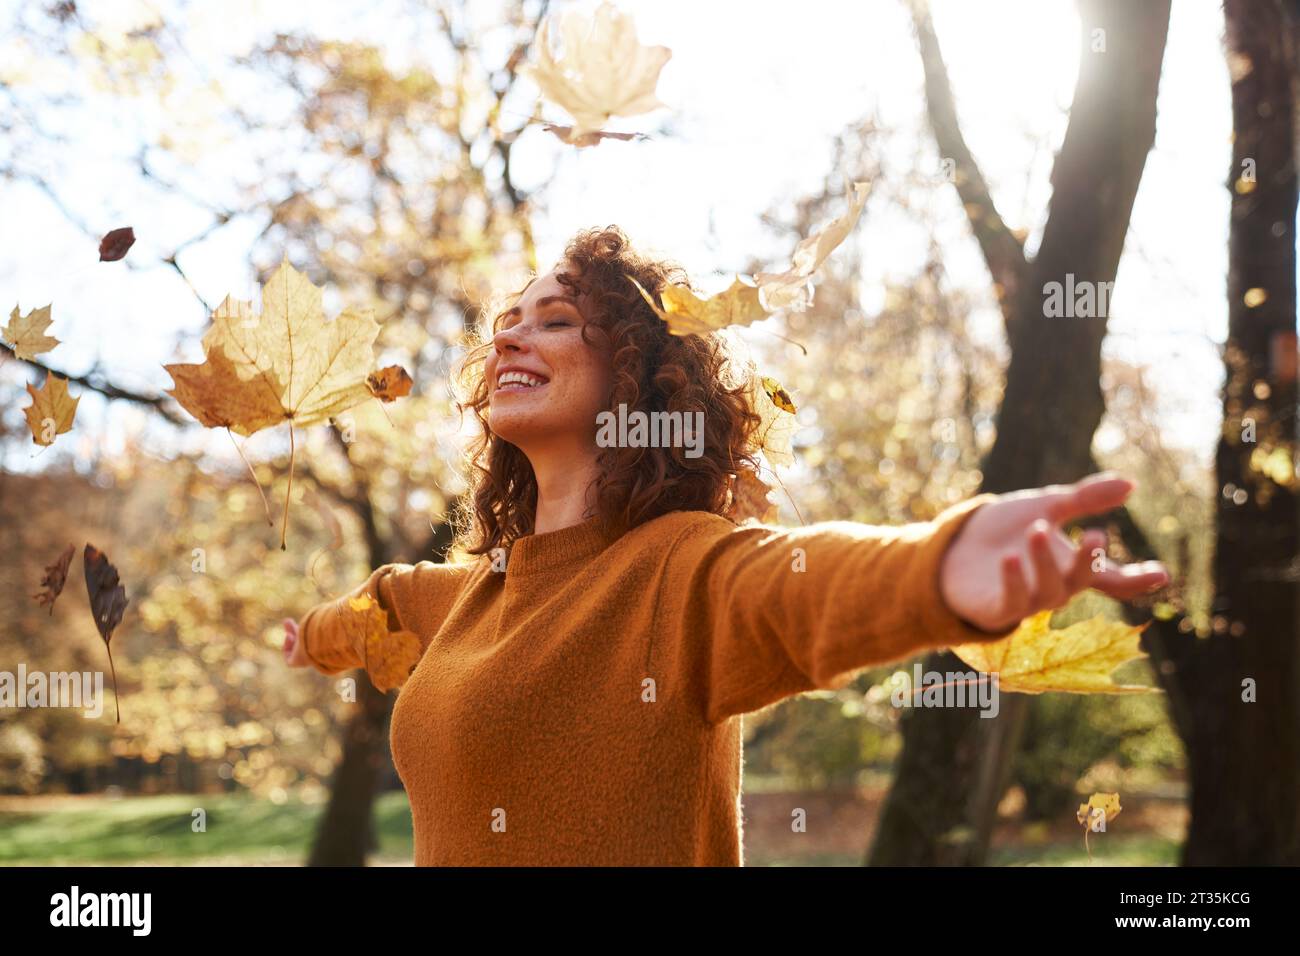 Autumn leaves falling on redhead woman with arms outstretched at park Stock Photo